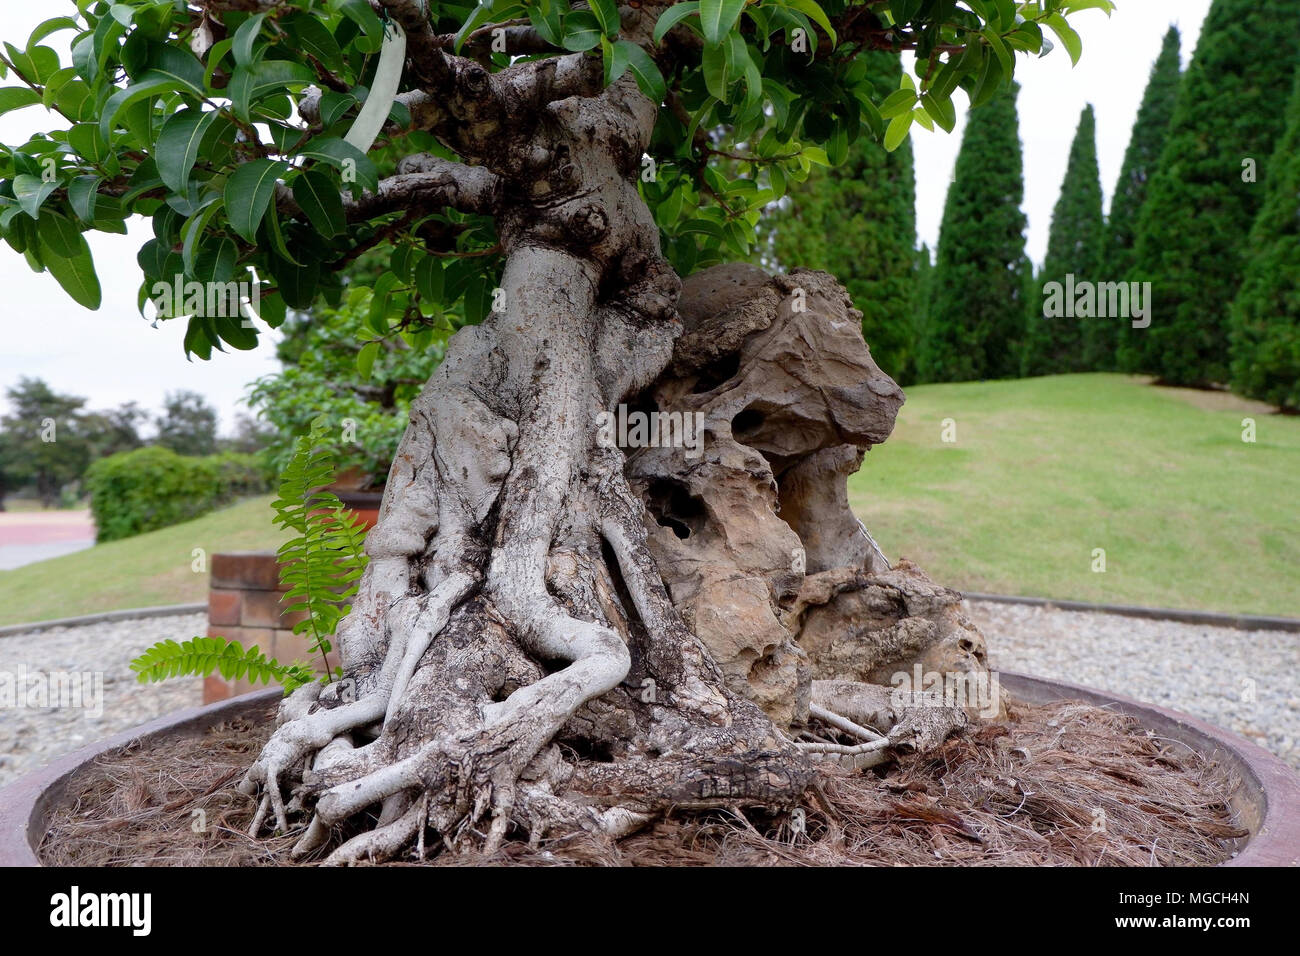 Closeup Root of Bonsai Tree in the City Park Stock Photo